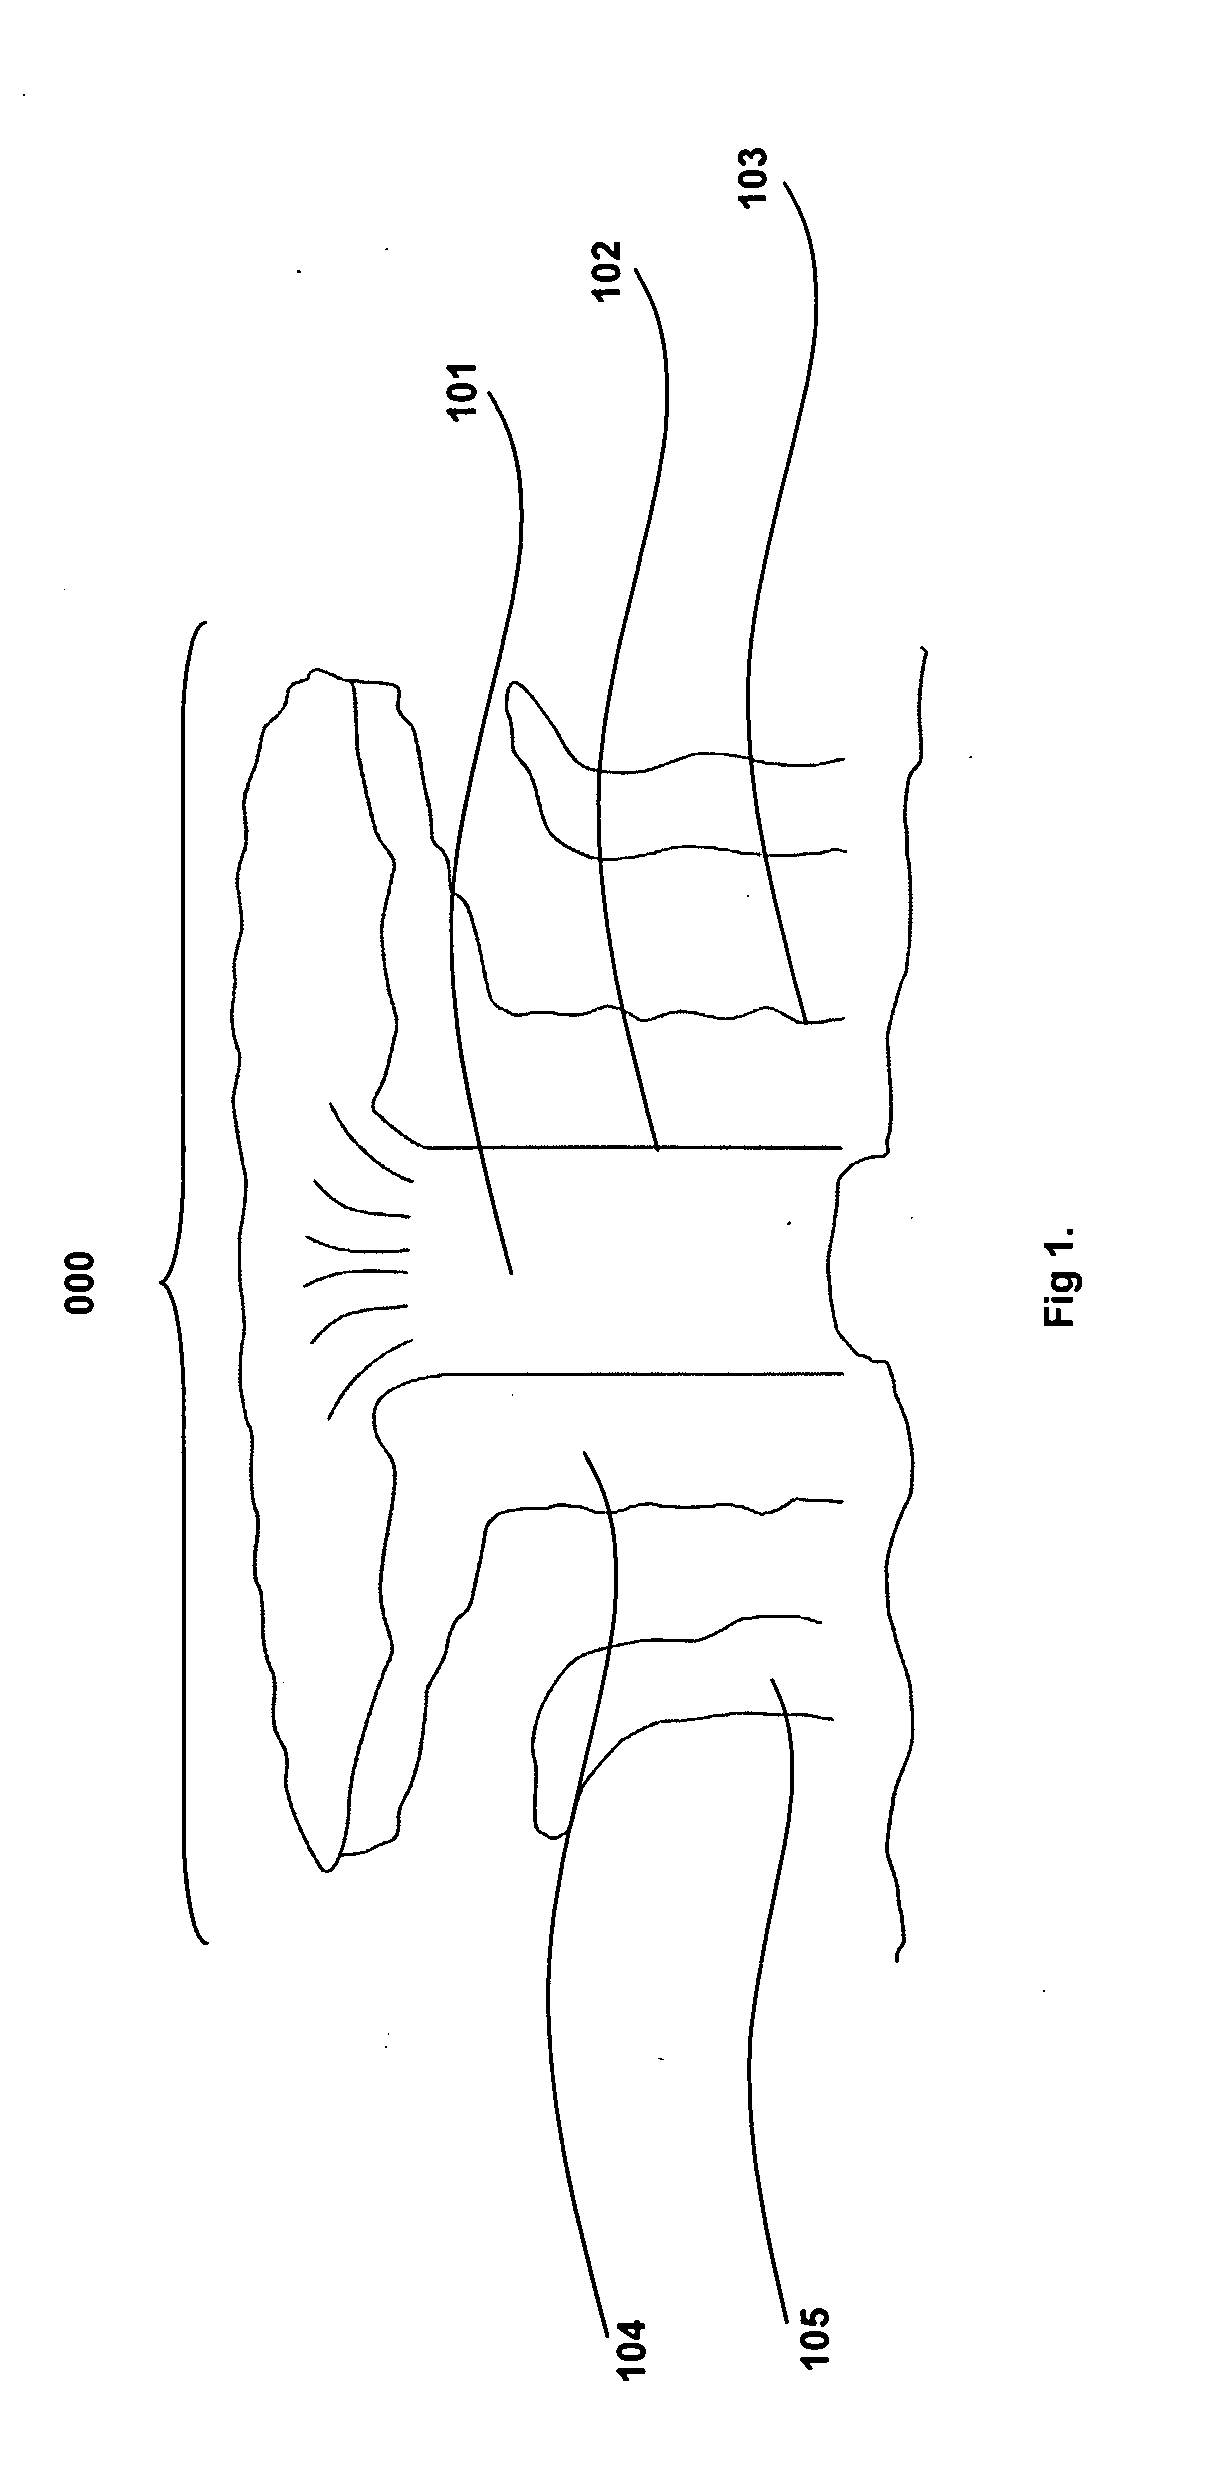 Method and system for accelerating dissipation of a landfalling tropical cyclone